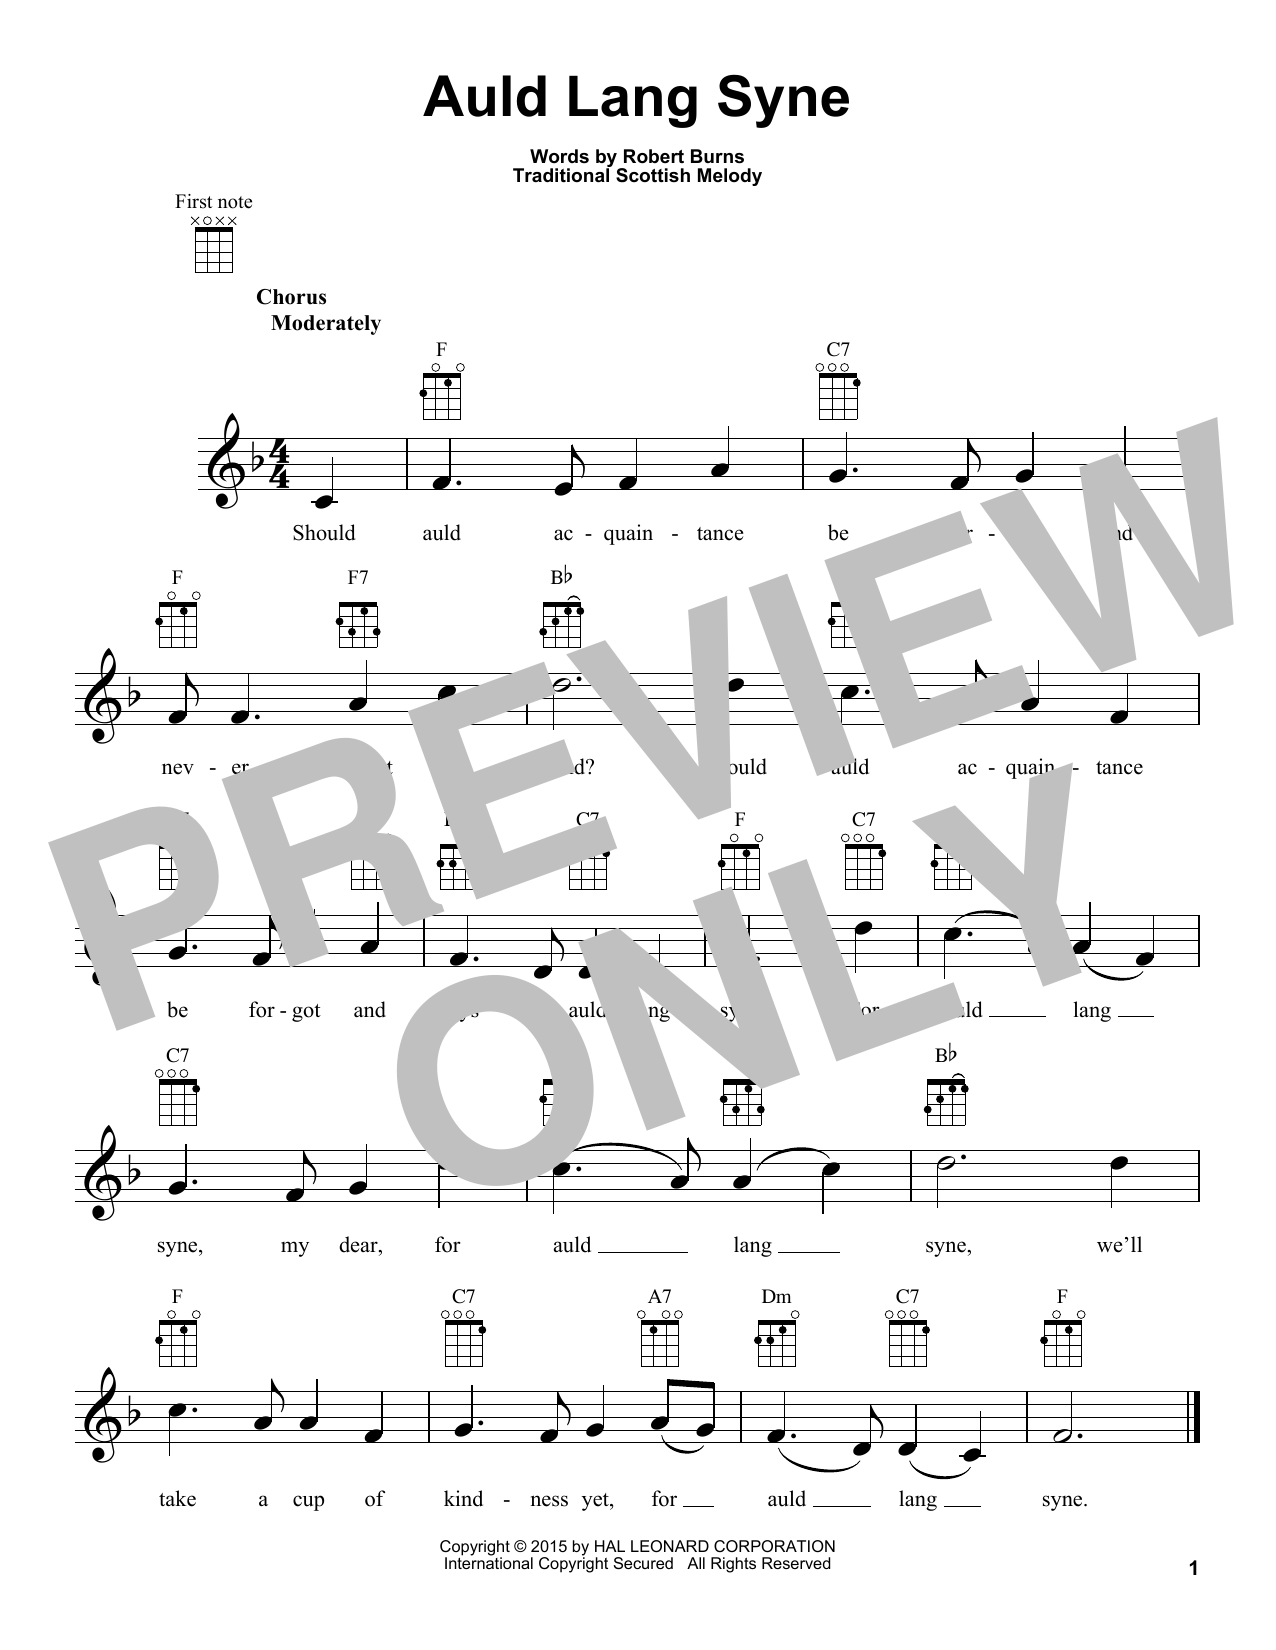 Download Traditional Auld Lang Syne Sheet Music